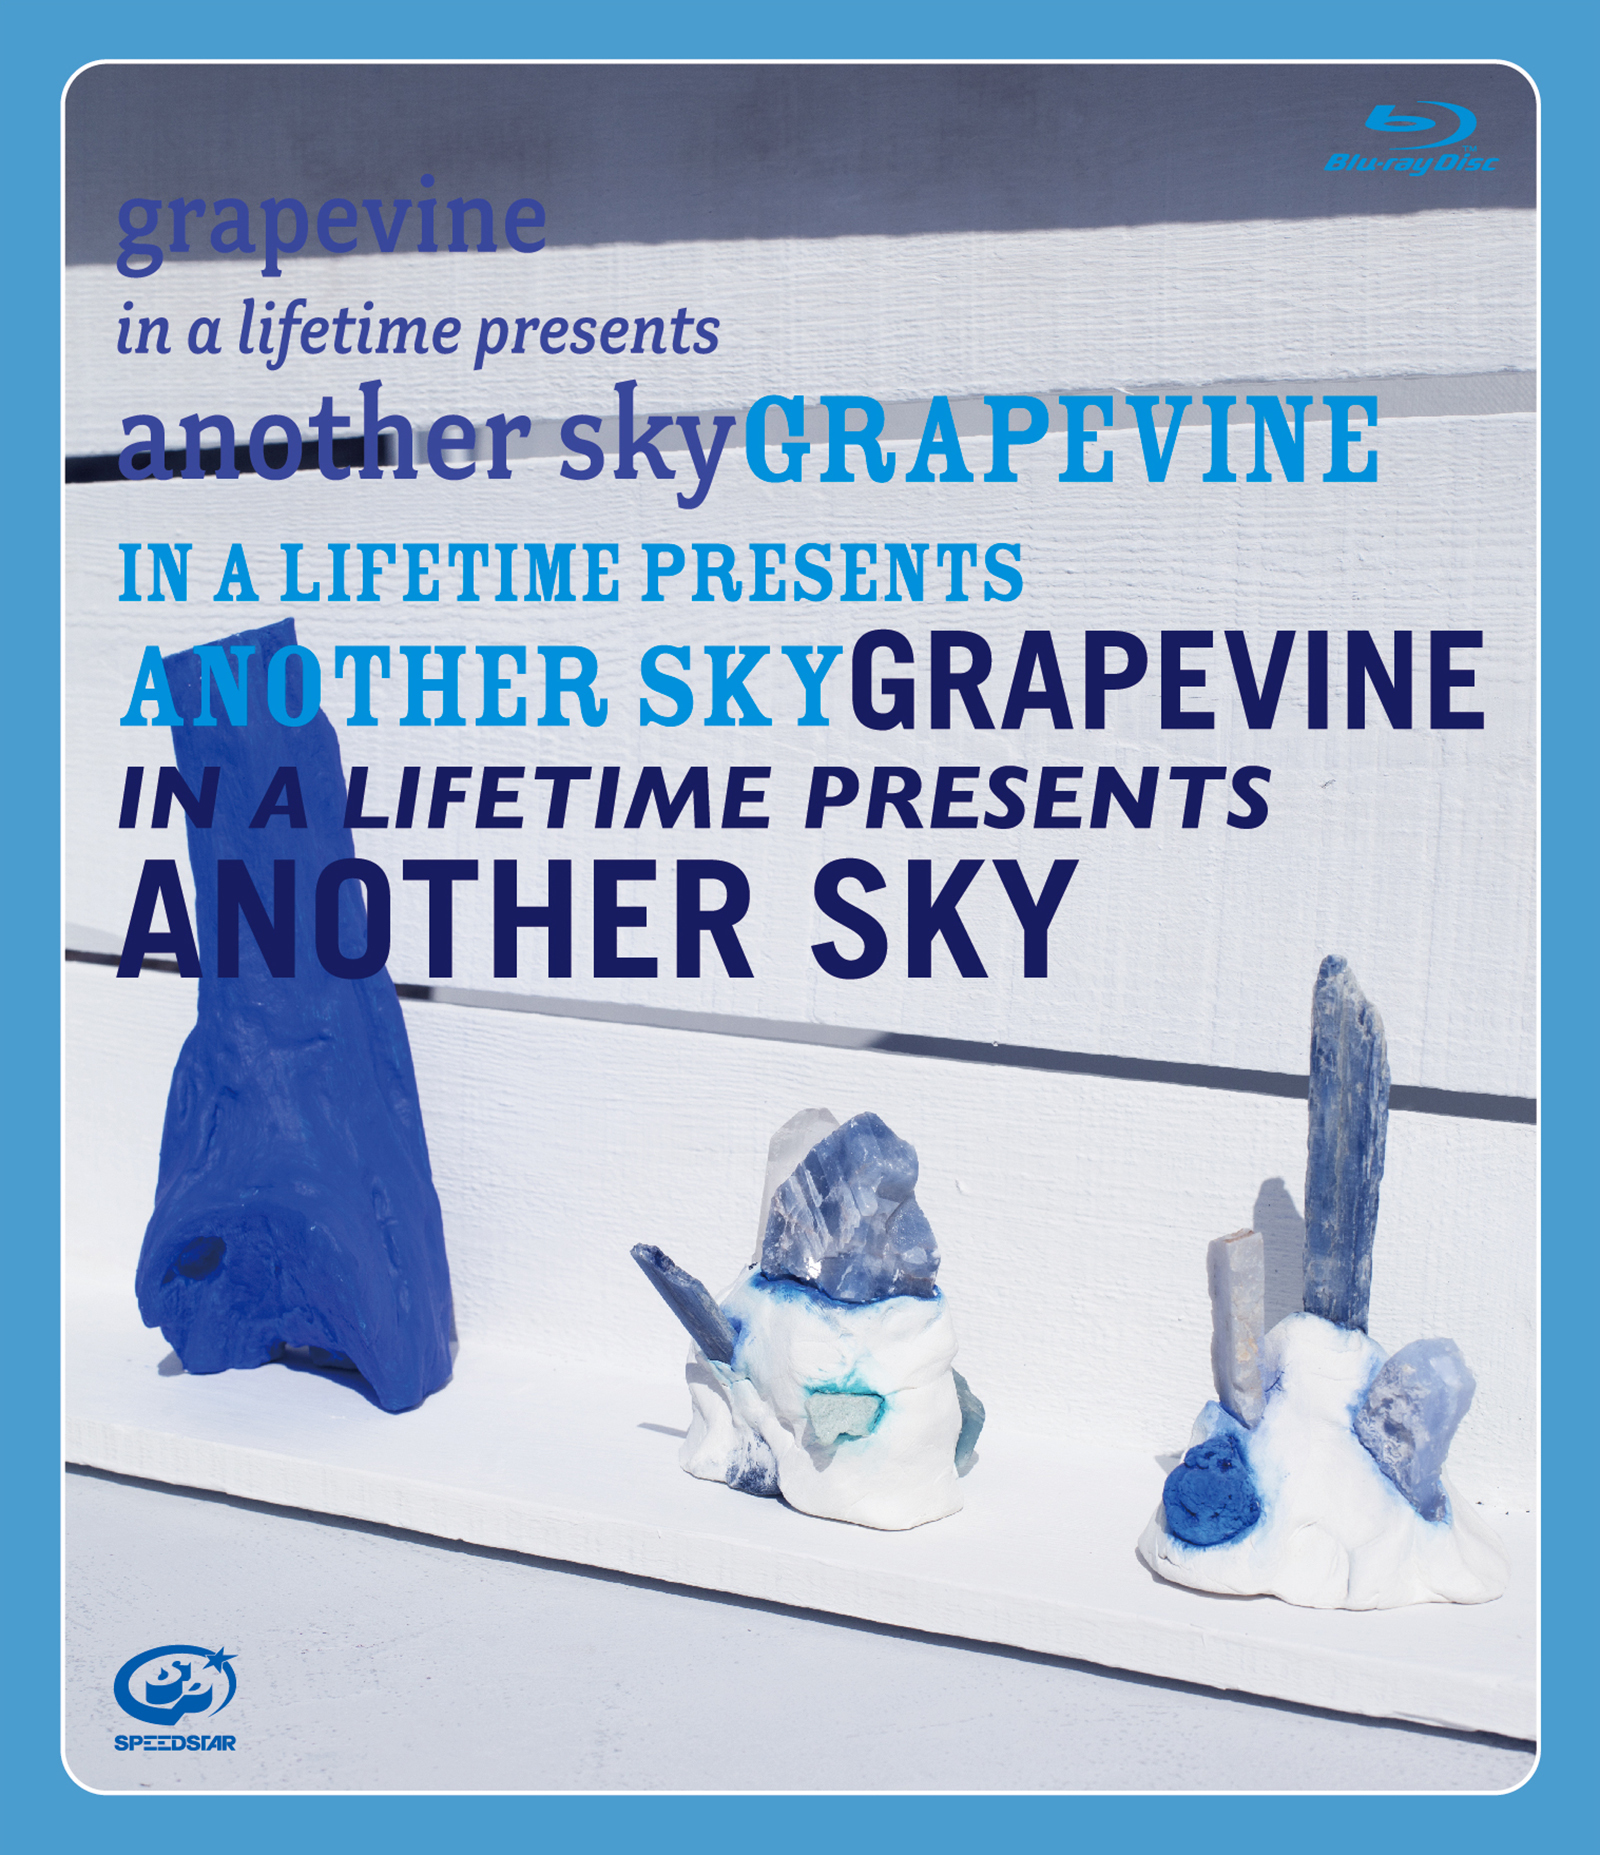 DVD_JKT_in a lifetime presents another sky